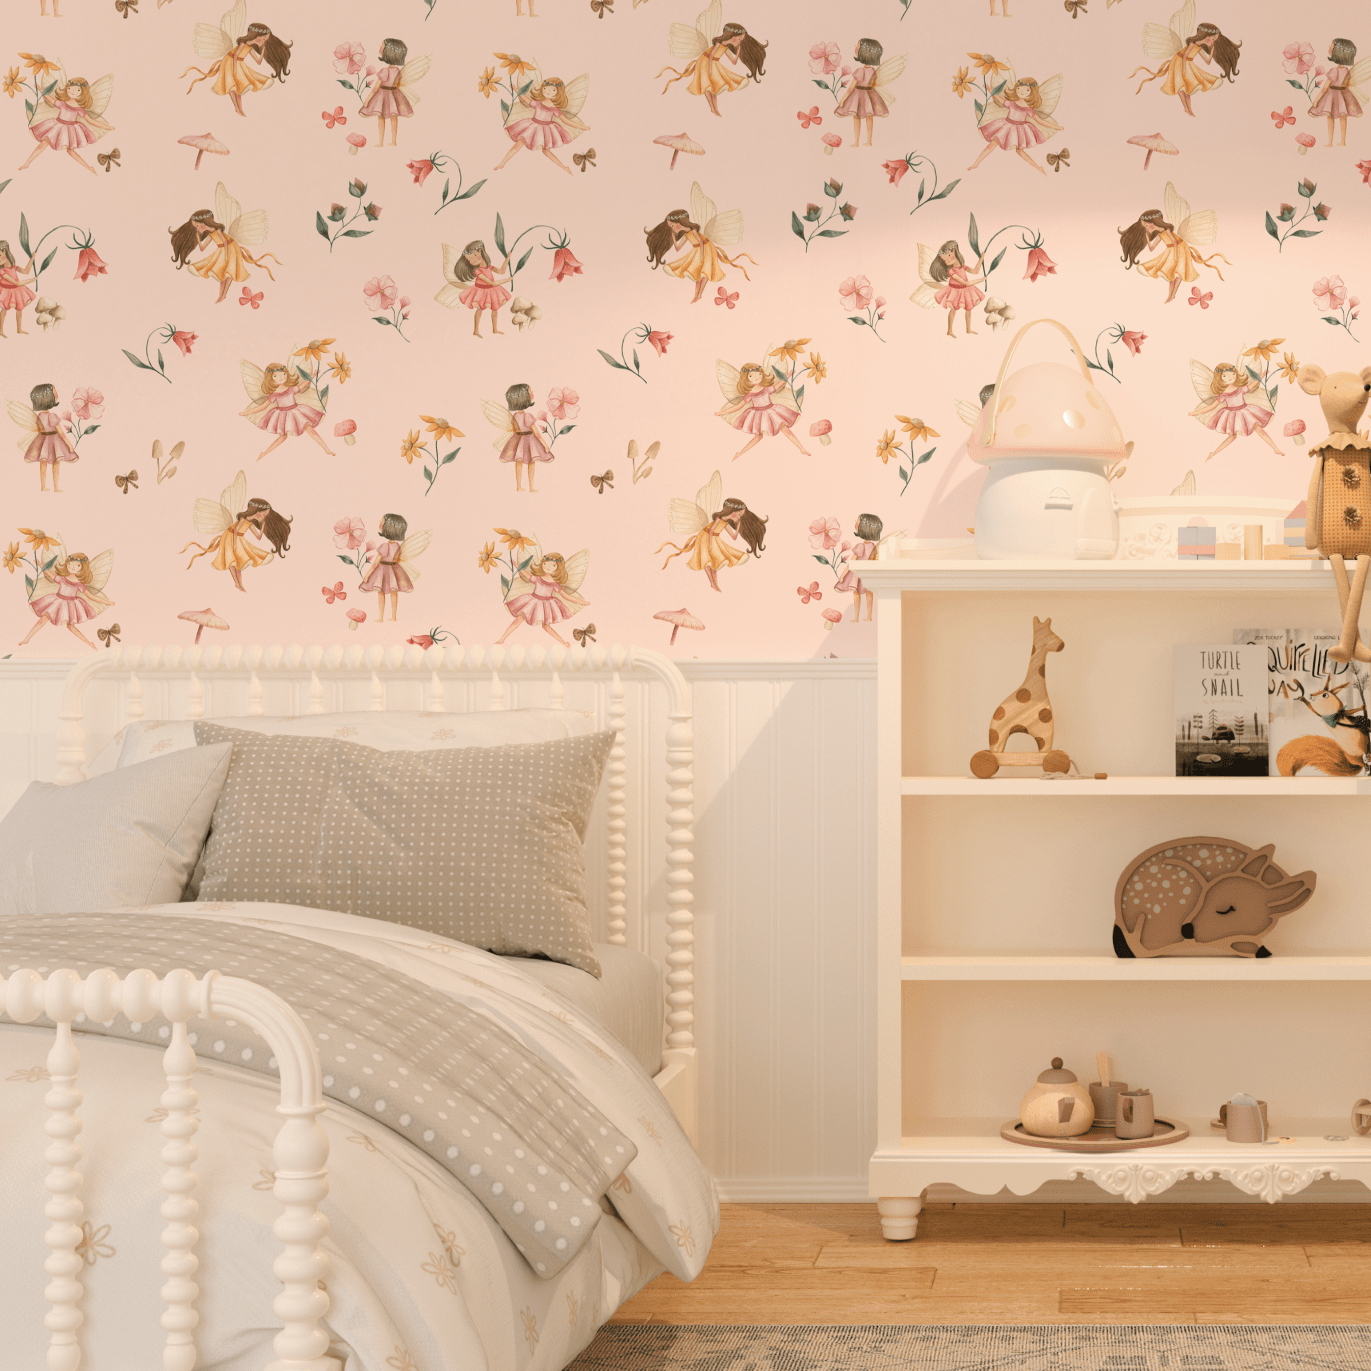  child's bedroom, showcasing the fairy wallpaper, the bed with decorative pillows, a bookshelf with children's books and toys, and a ceiling light